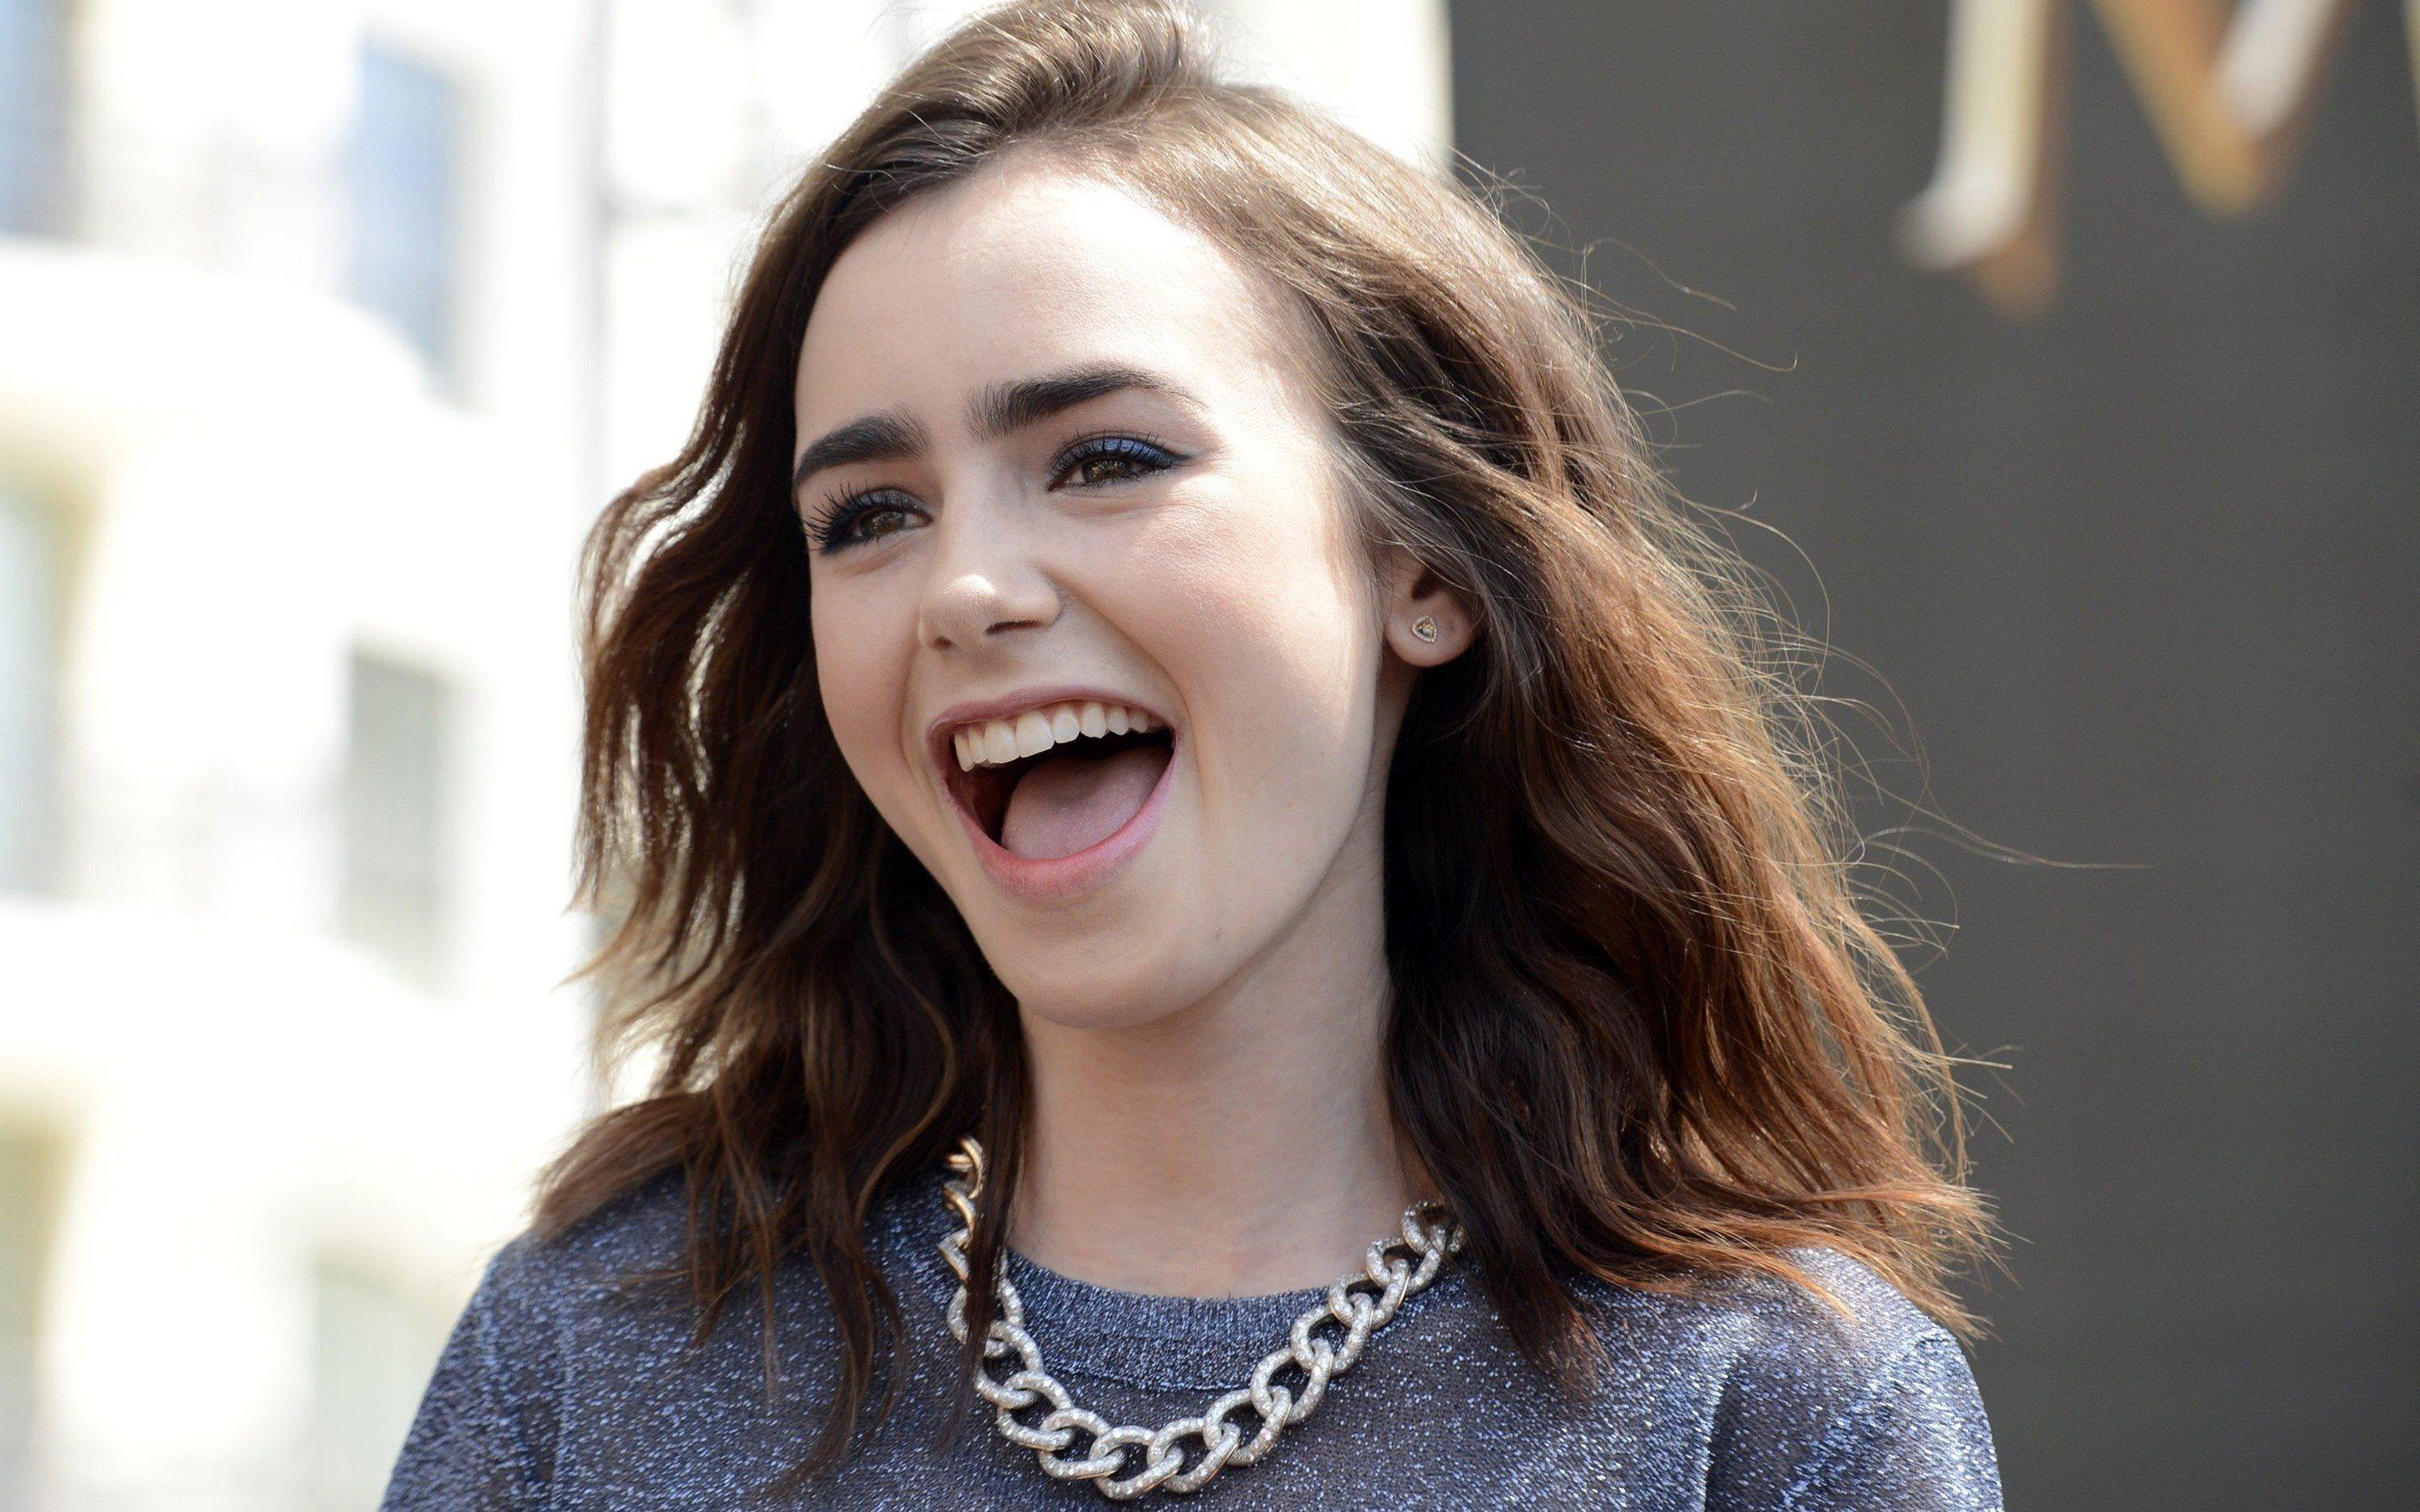 Download wallpaper Lily Collins, beauty, girls, british actress